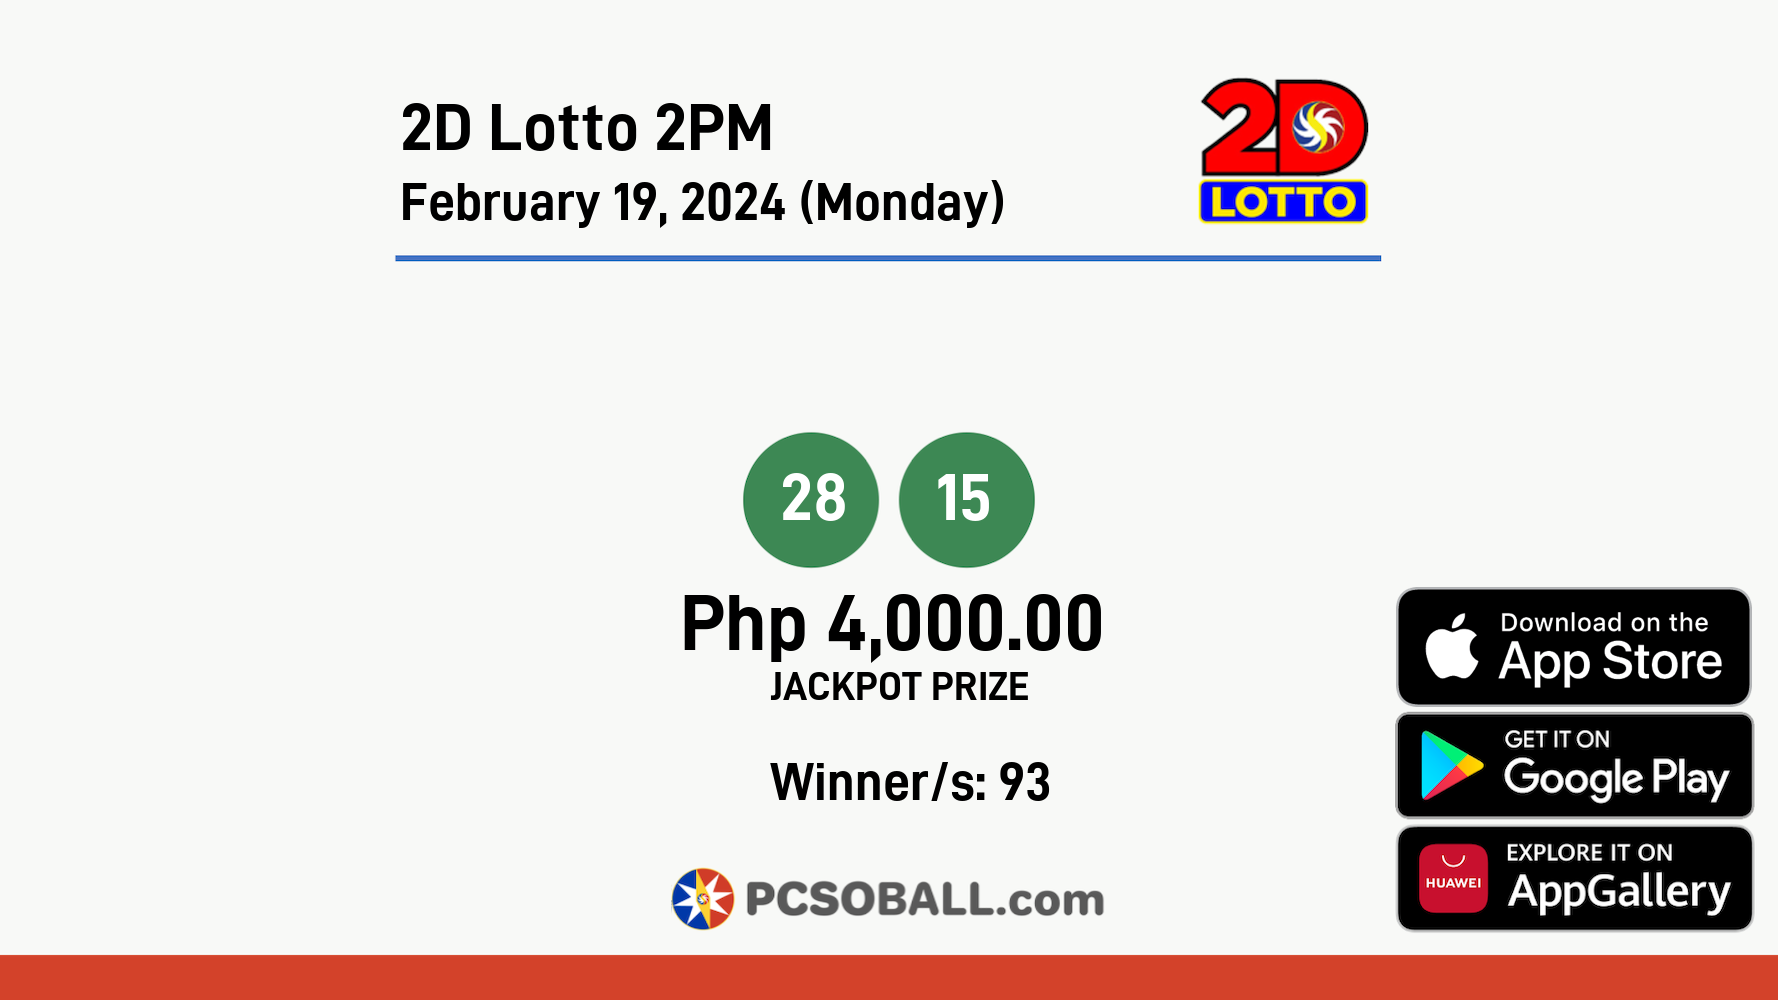 2D Lotto 2PM February 19, 2024 (Monday) Result